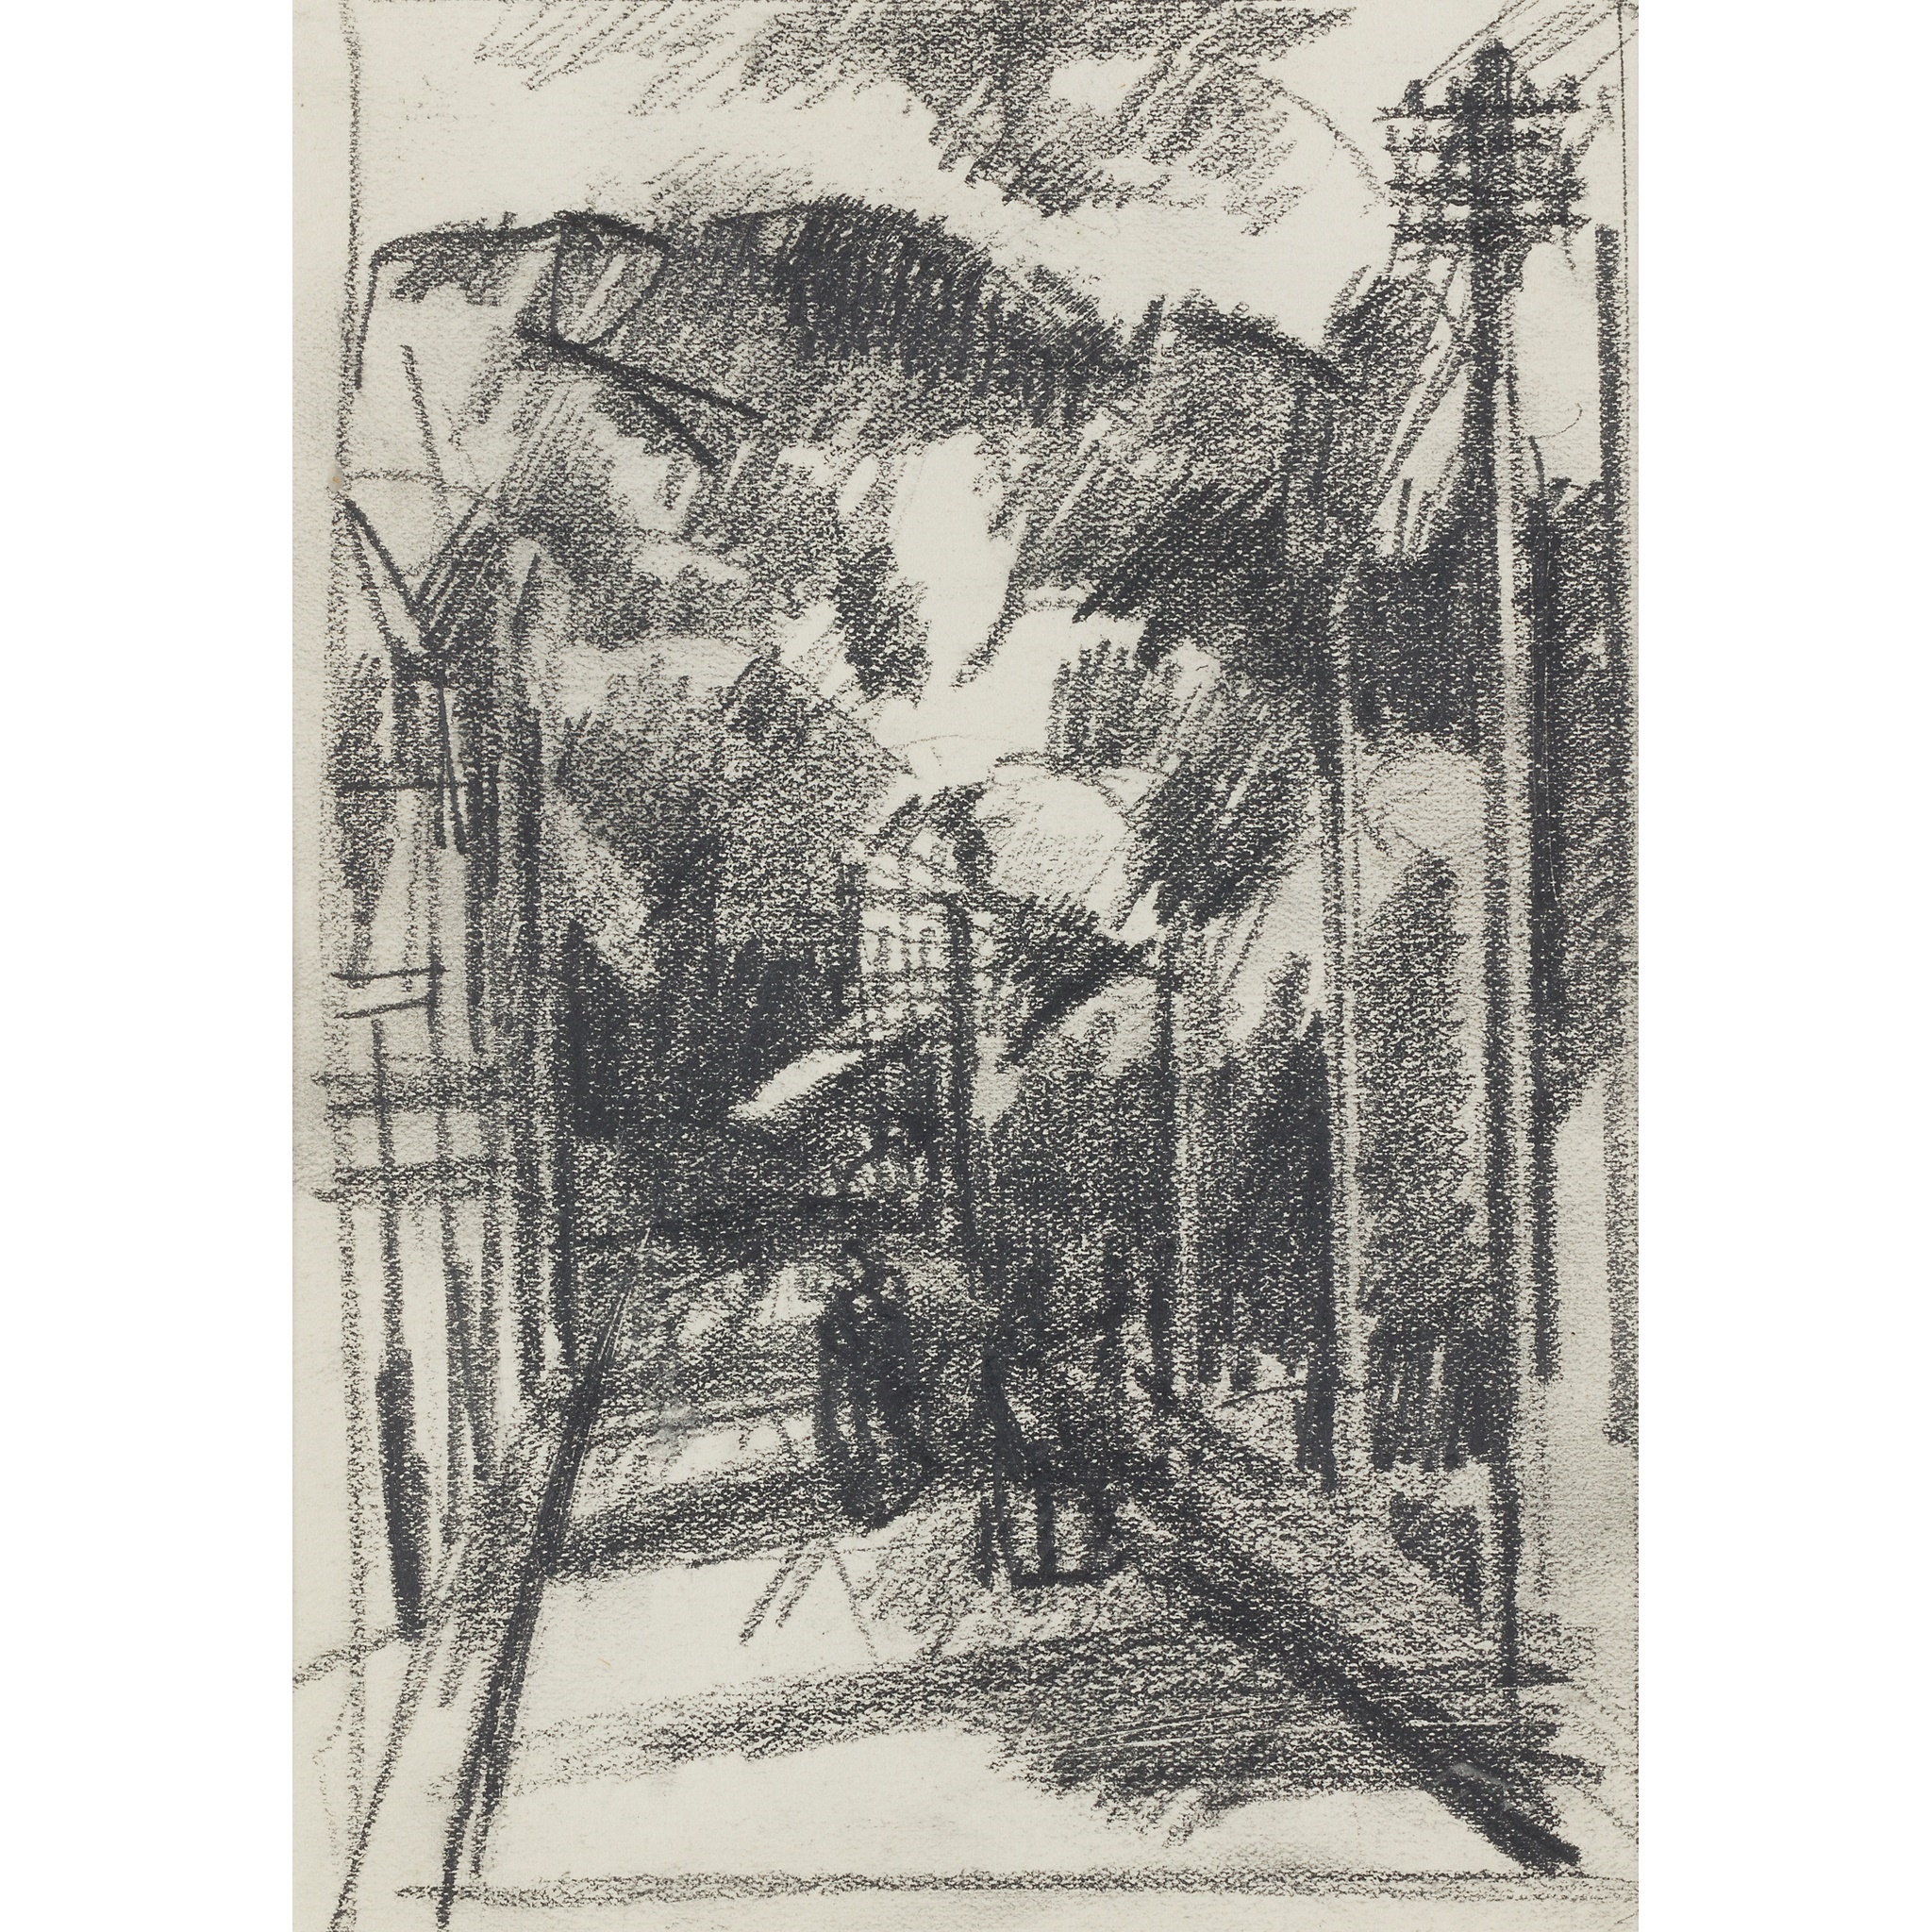 LOT 21 | § JOHN DUNCAN FERGUSSON R.B.A. (SCOTTISH 1874-1961) FIGURES PROMENADING HARLECH Conté drawing | 17cm x 12cm (6.5in x 4.75in) | Exhibited: Alexander Meddowes, A Tribute to Fergus 2004, no.116 £1,000 - £1,500 + fees